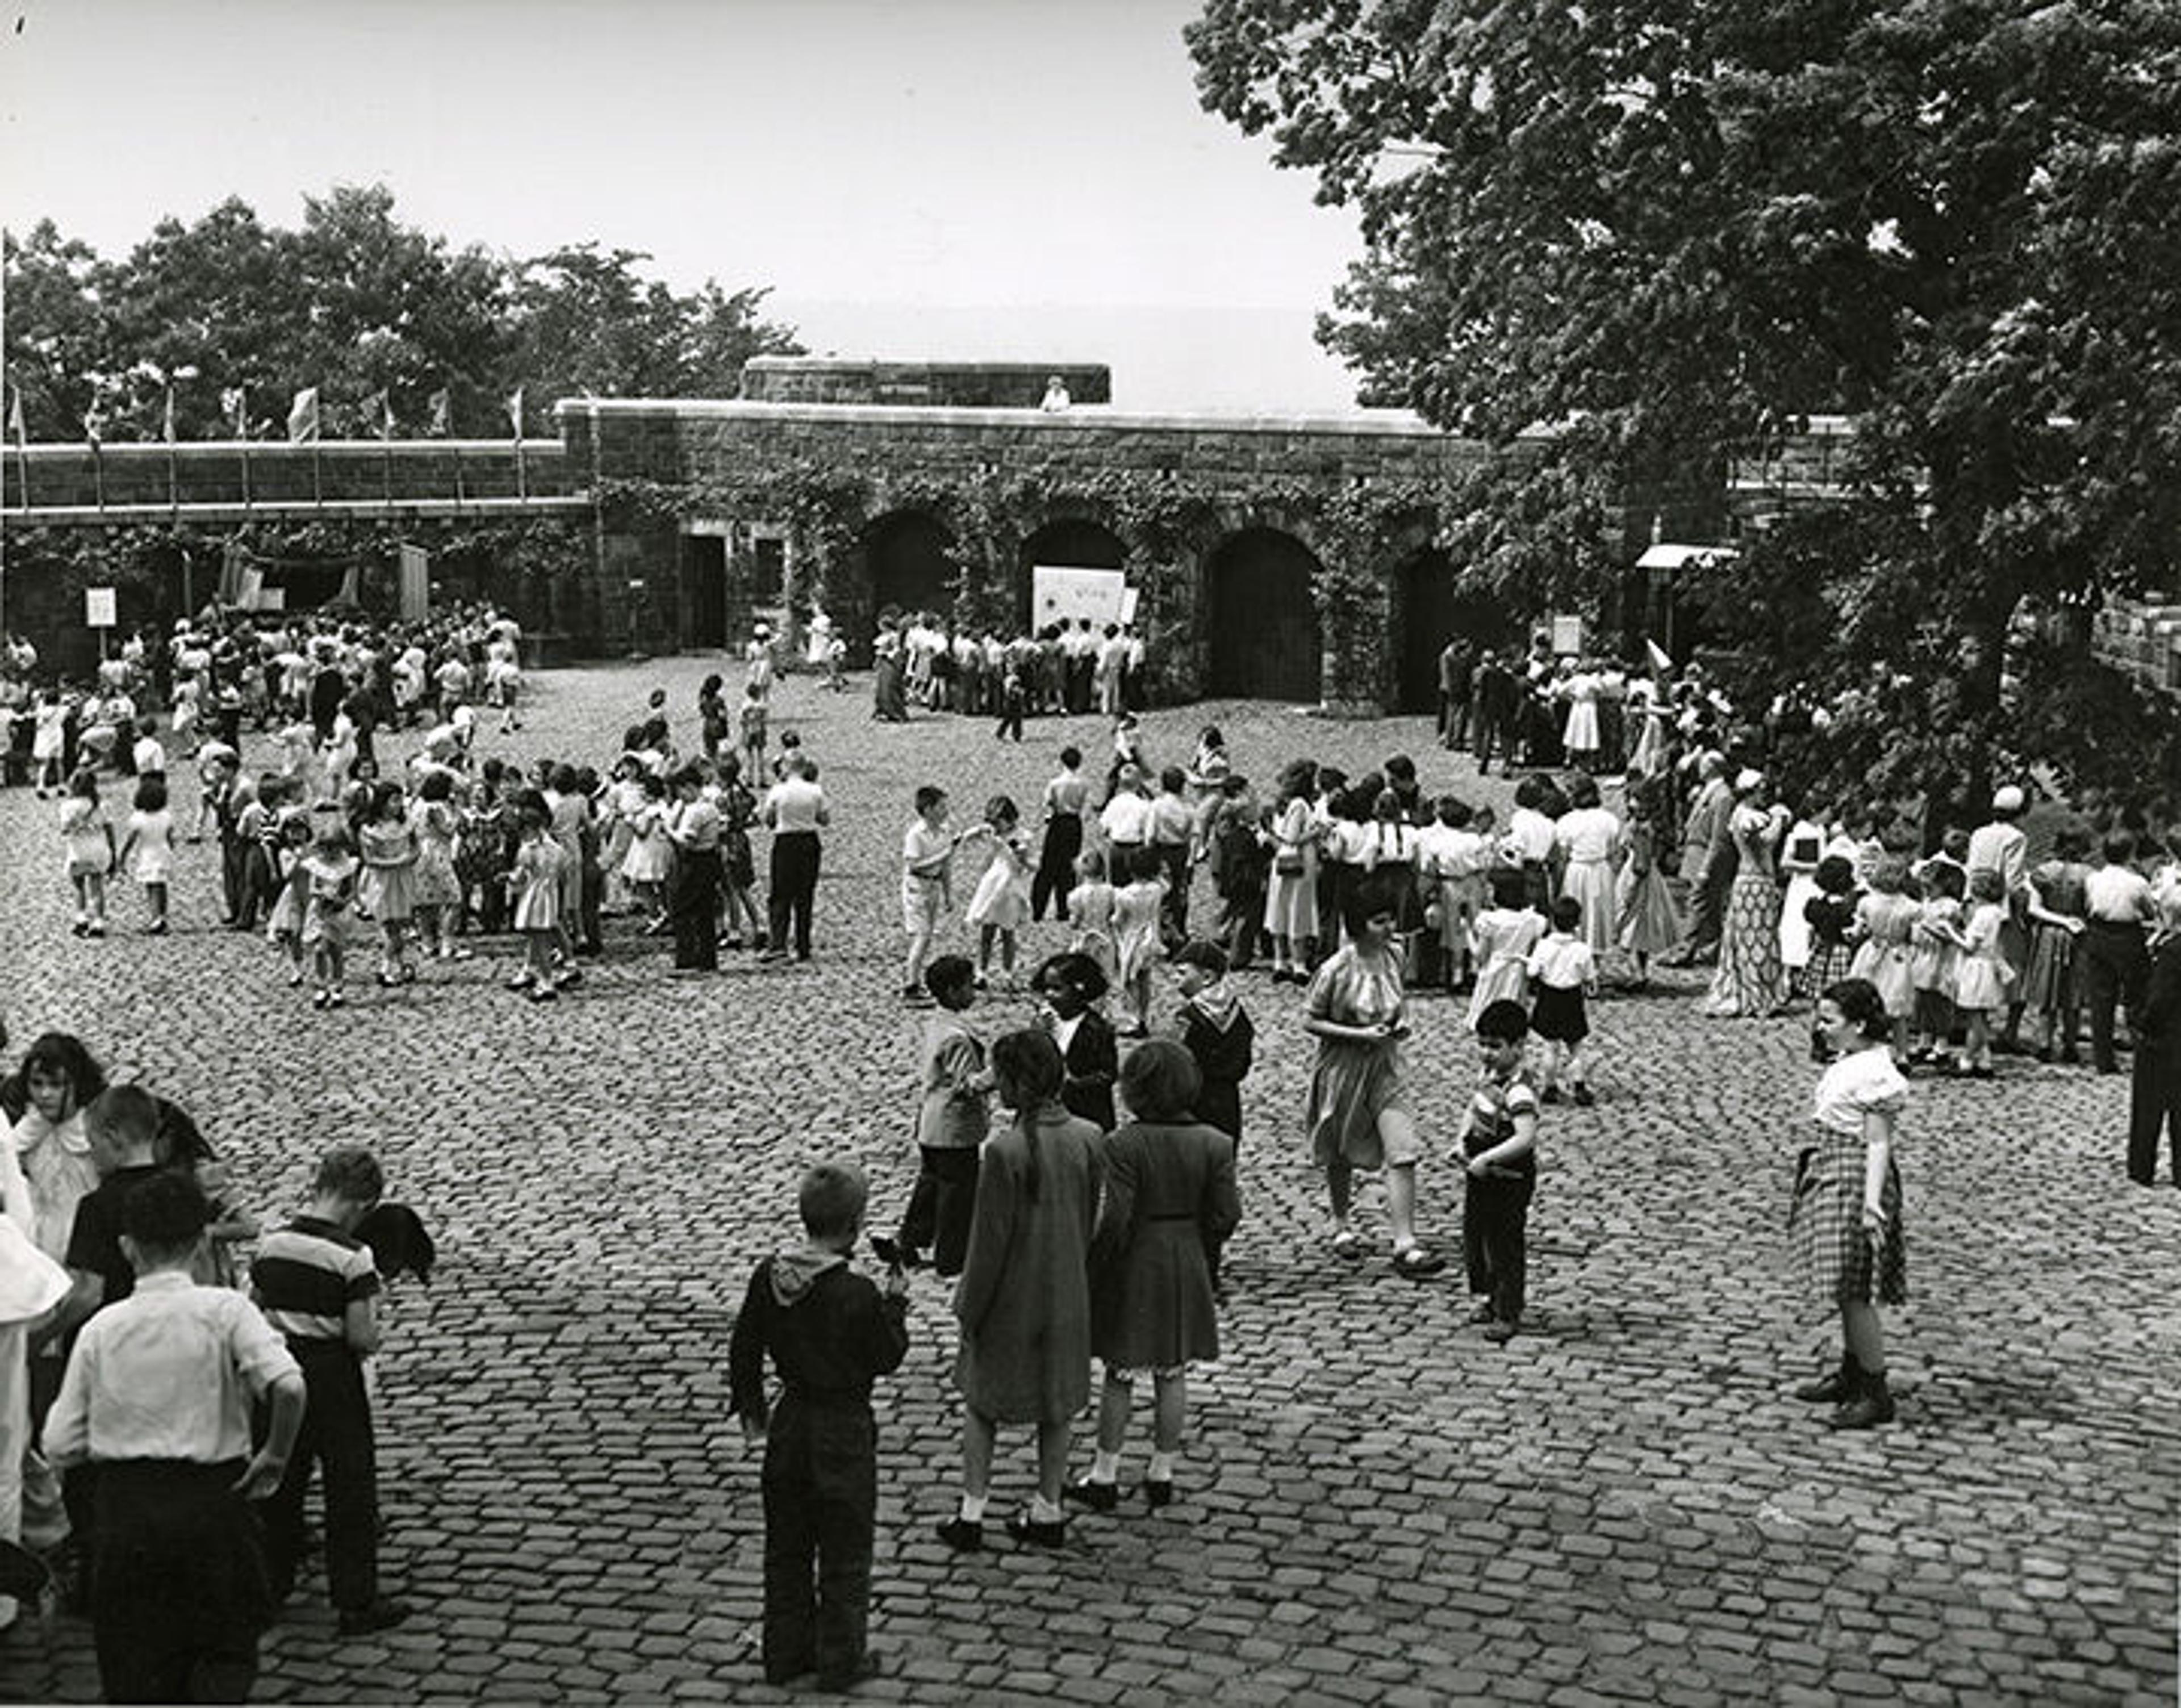 View of The Met Cloisters in 1951